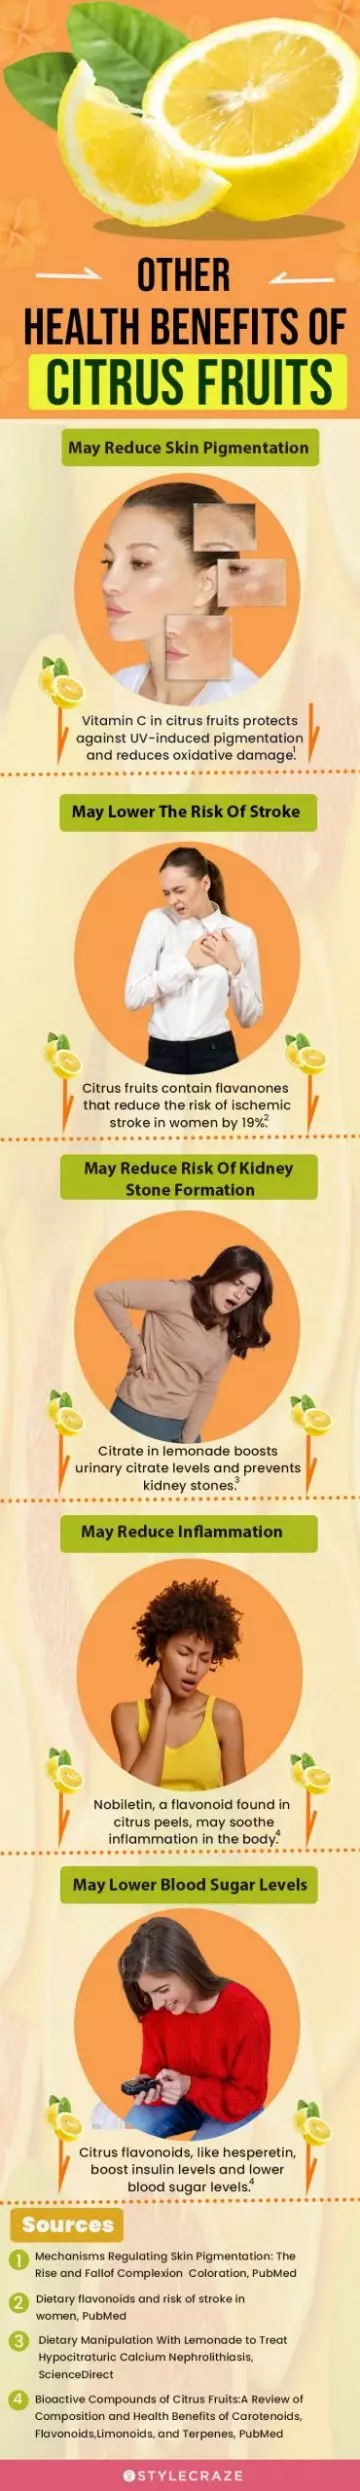 other benefits of citrus fruits (infographic)